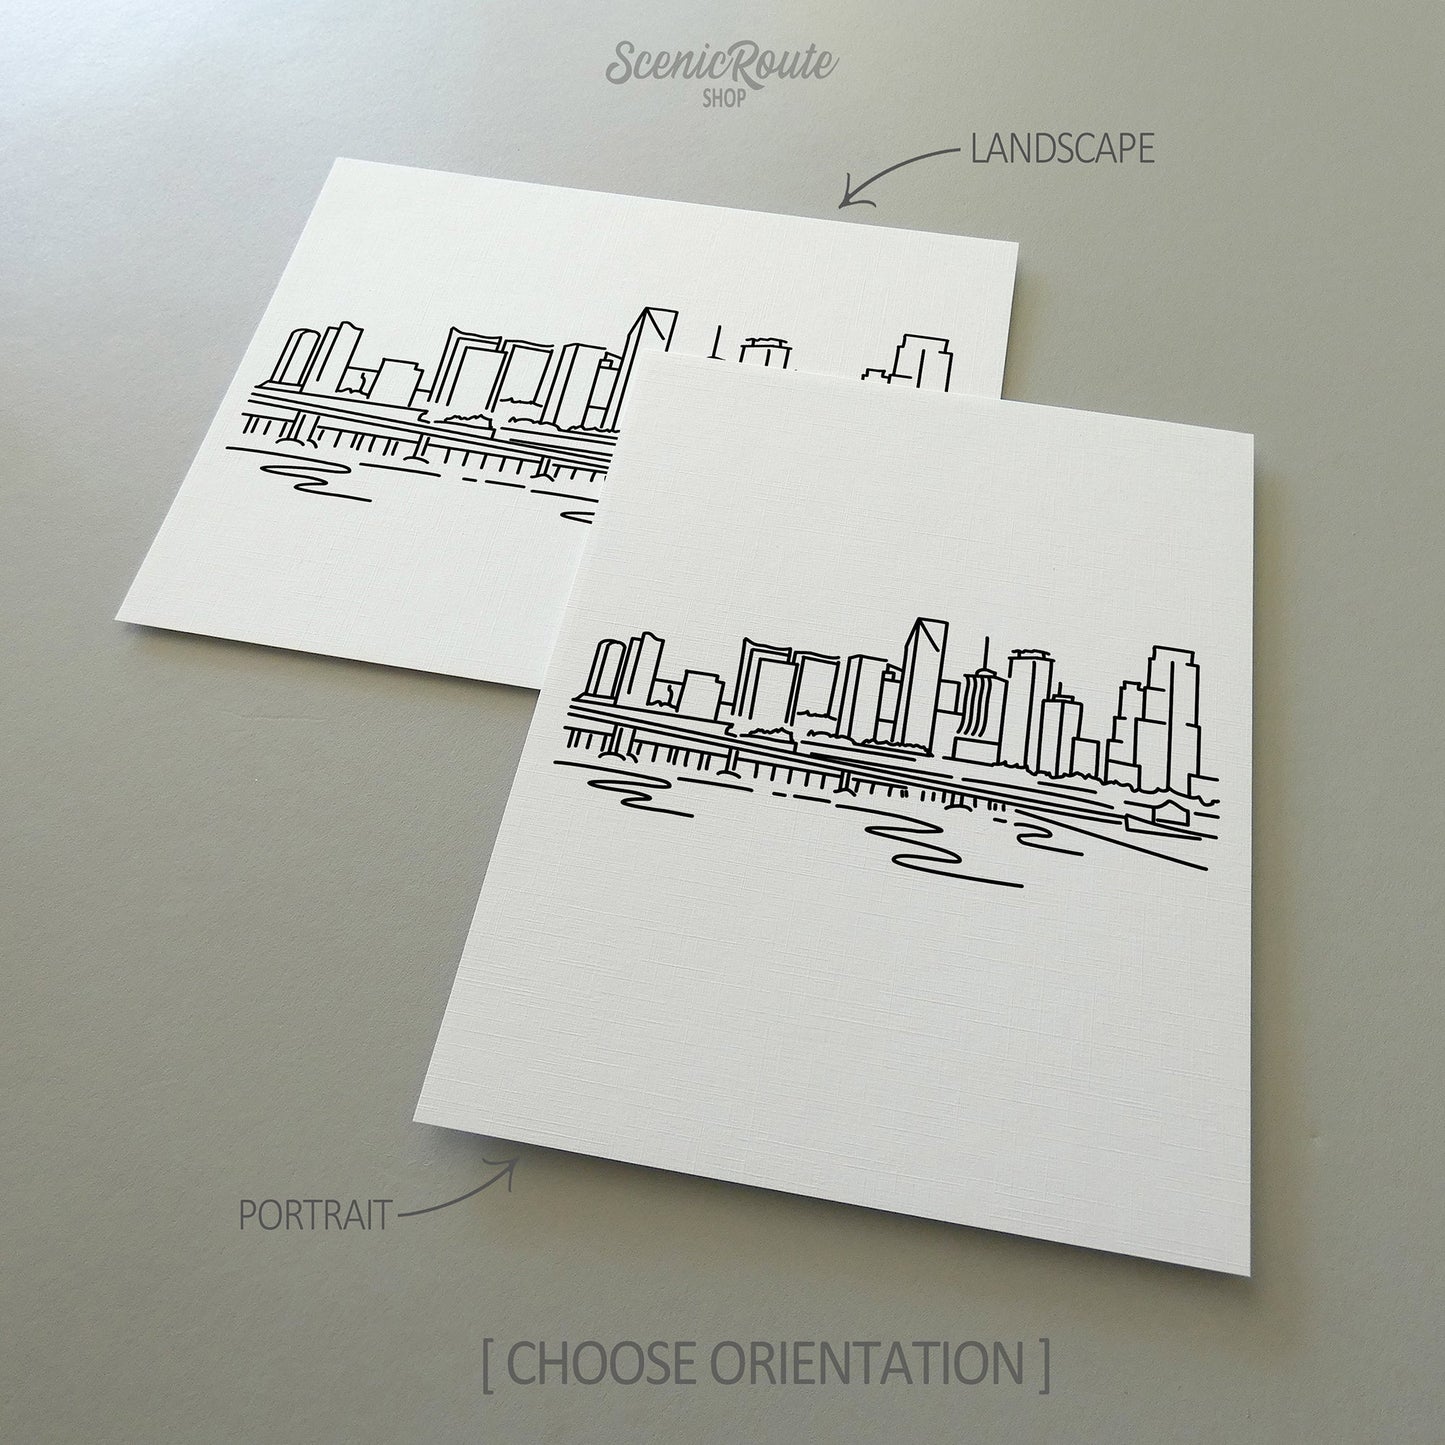 Two line art drawings of the Miami Skyline on white linen paper with a gray background.  The pieces are shown in portrait and landscape orientation for the available art print options.